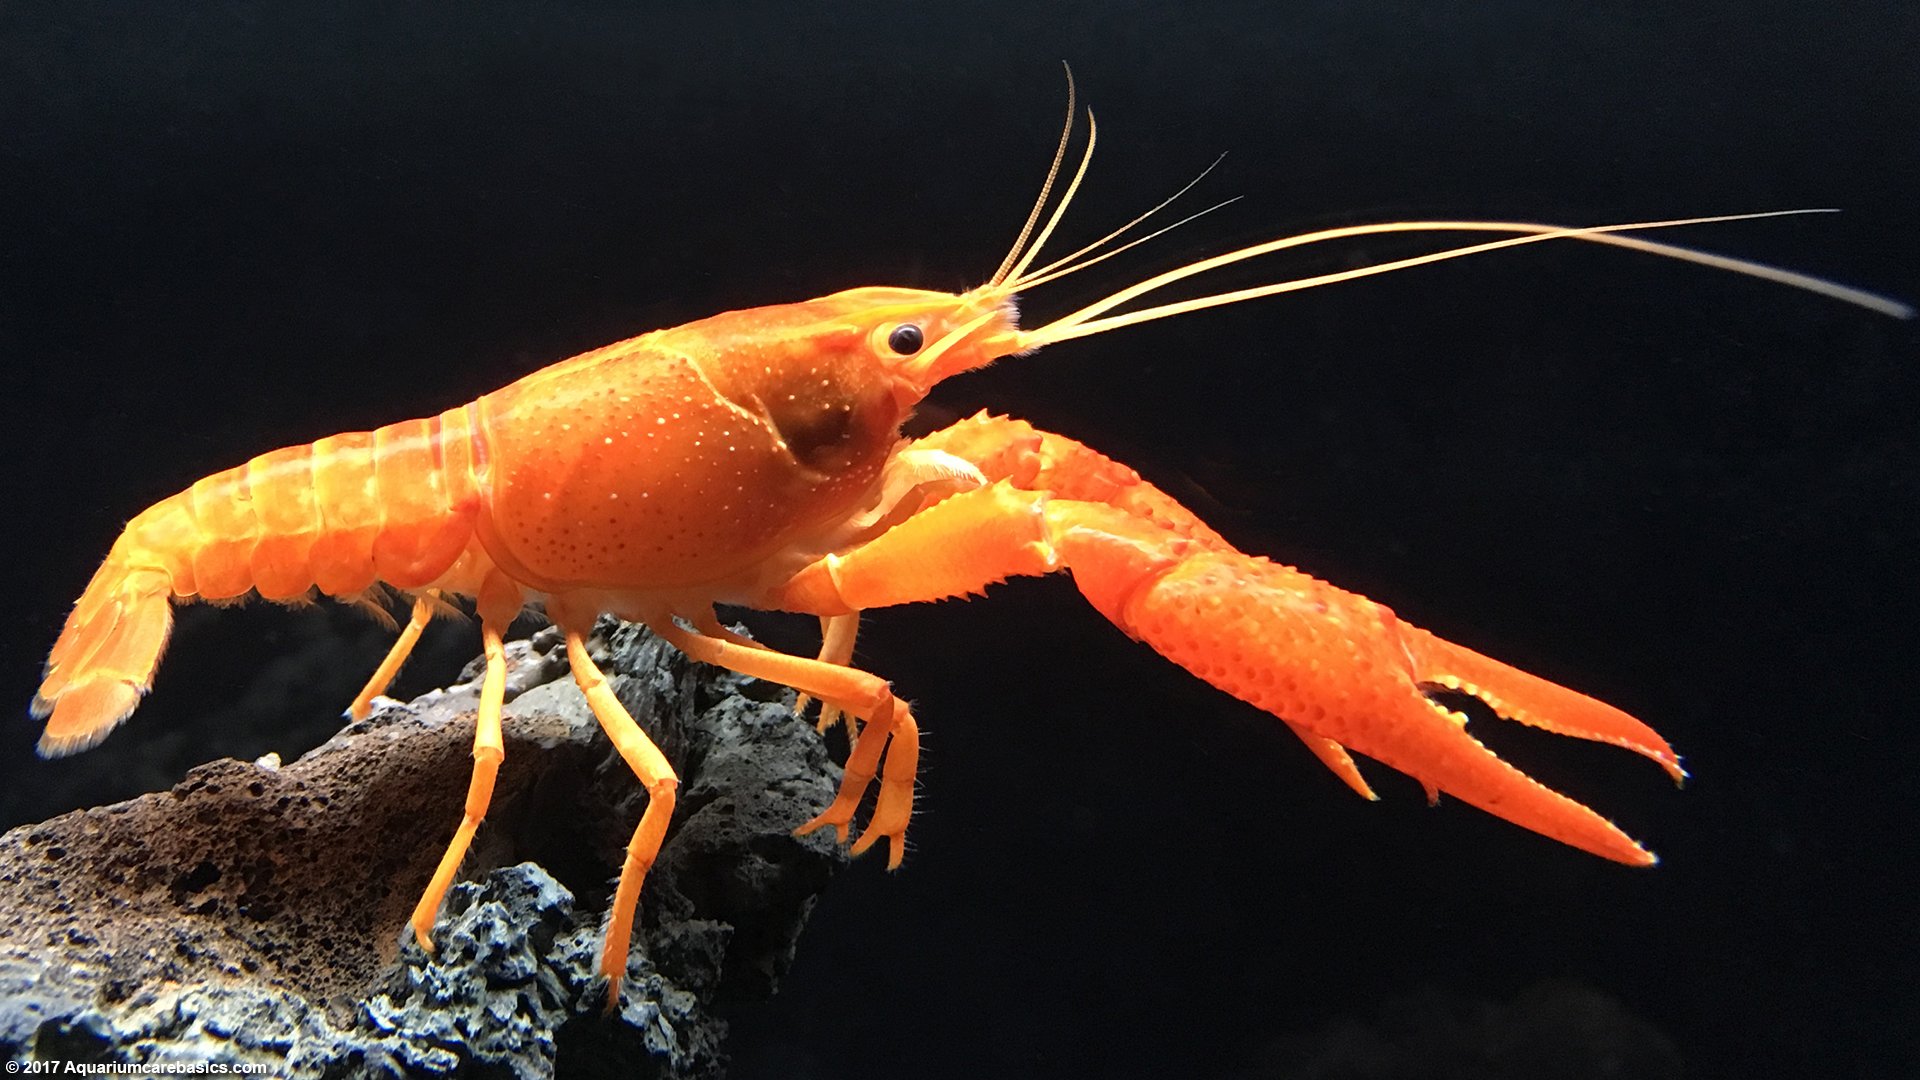 Tangerine Lobster: Care, Size, Color, Food, Feeding & Molting - Video